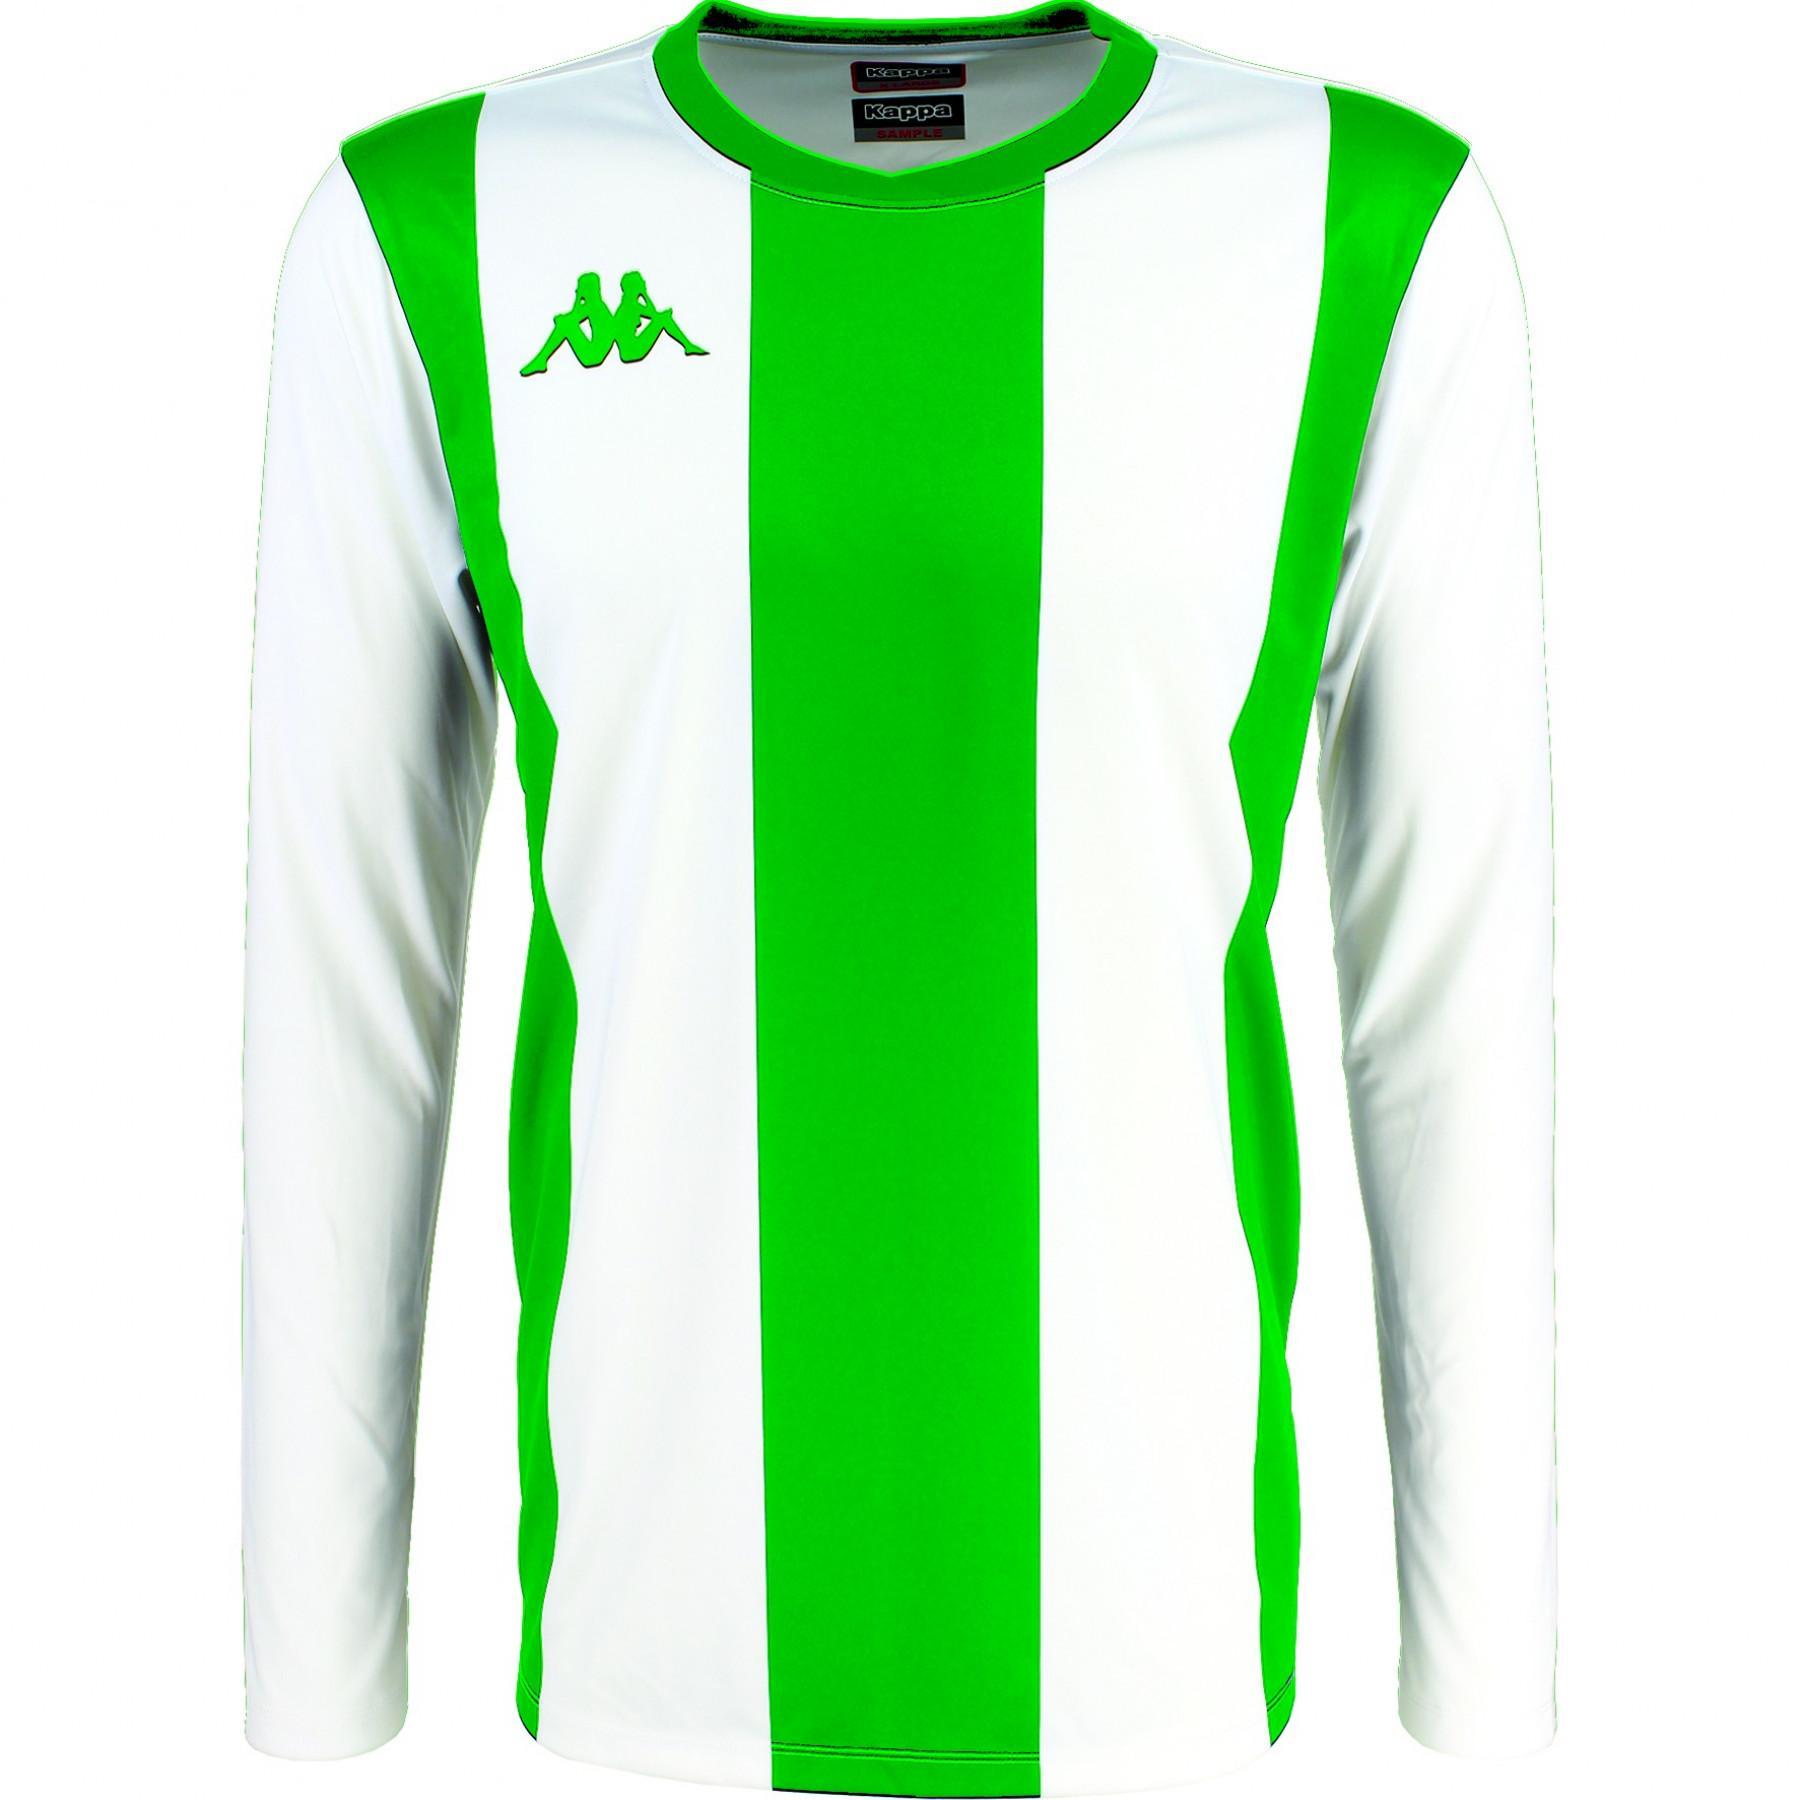 Maillot manches longues Kappa Caserne